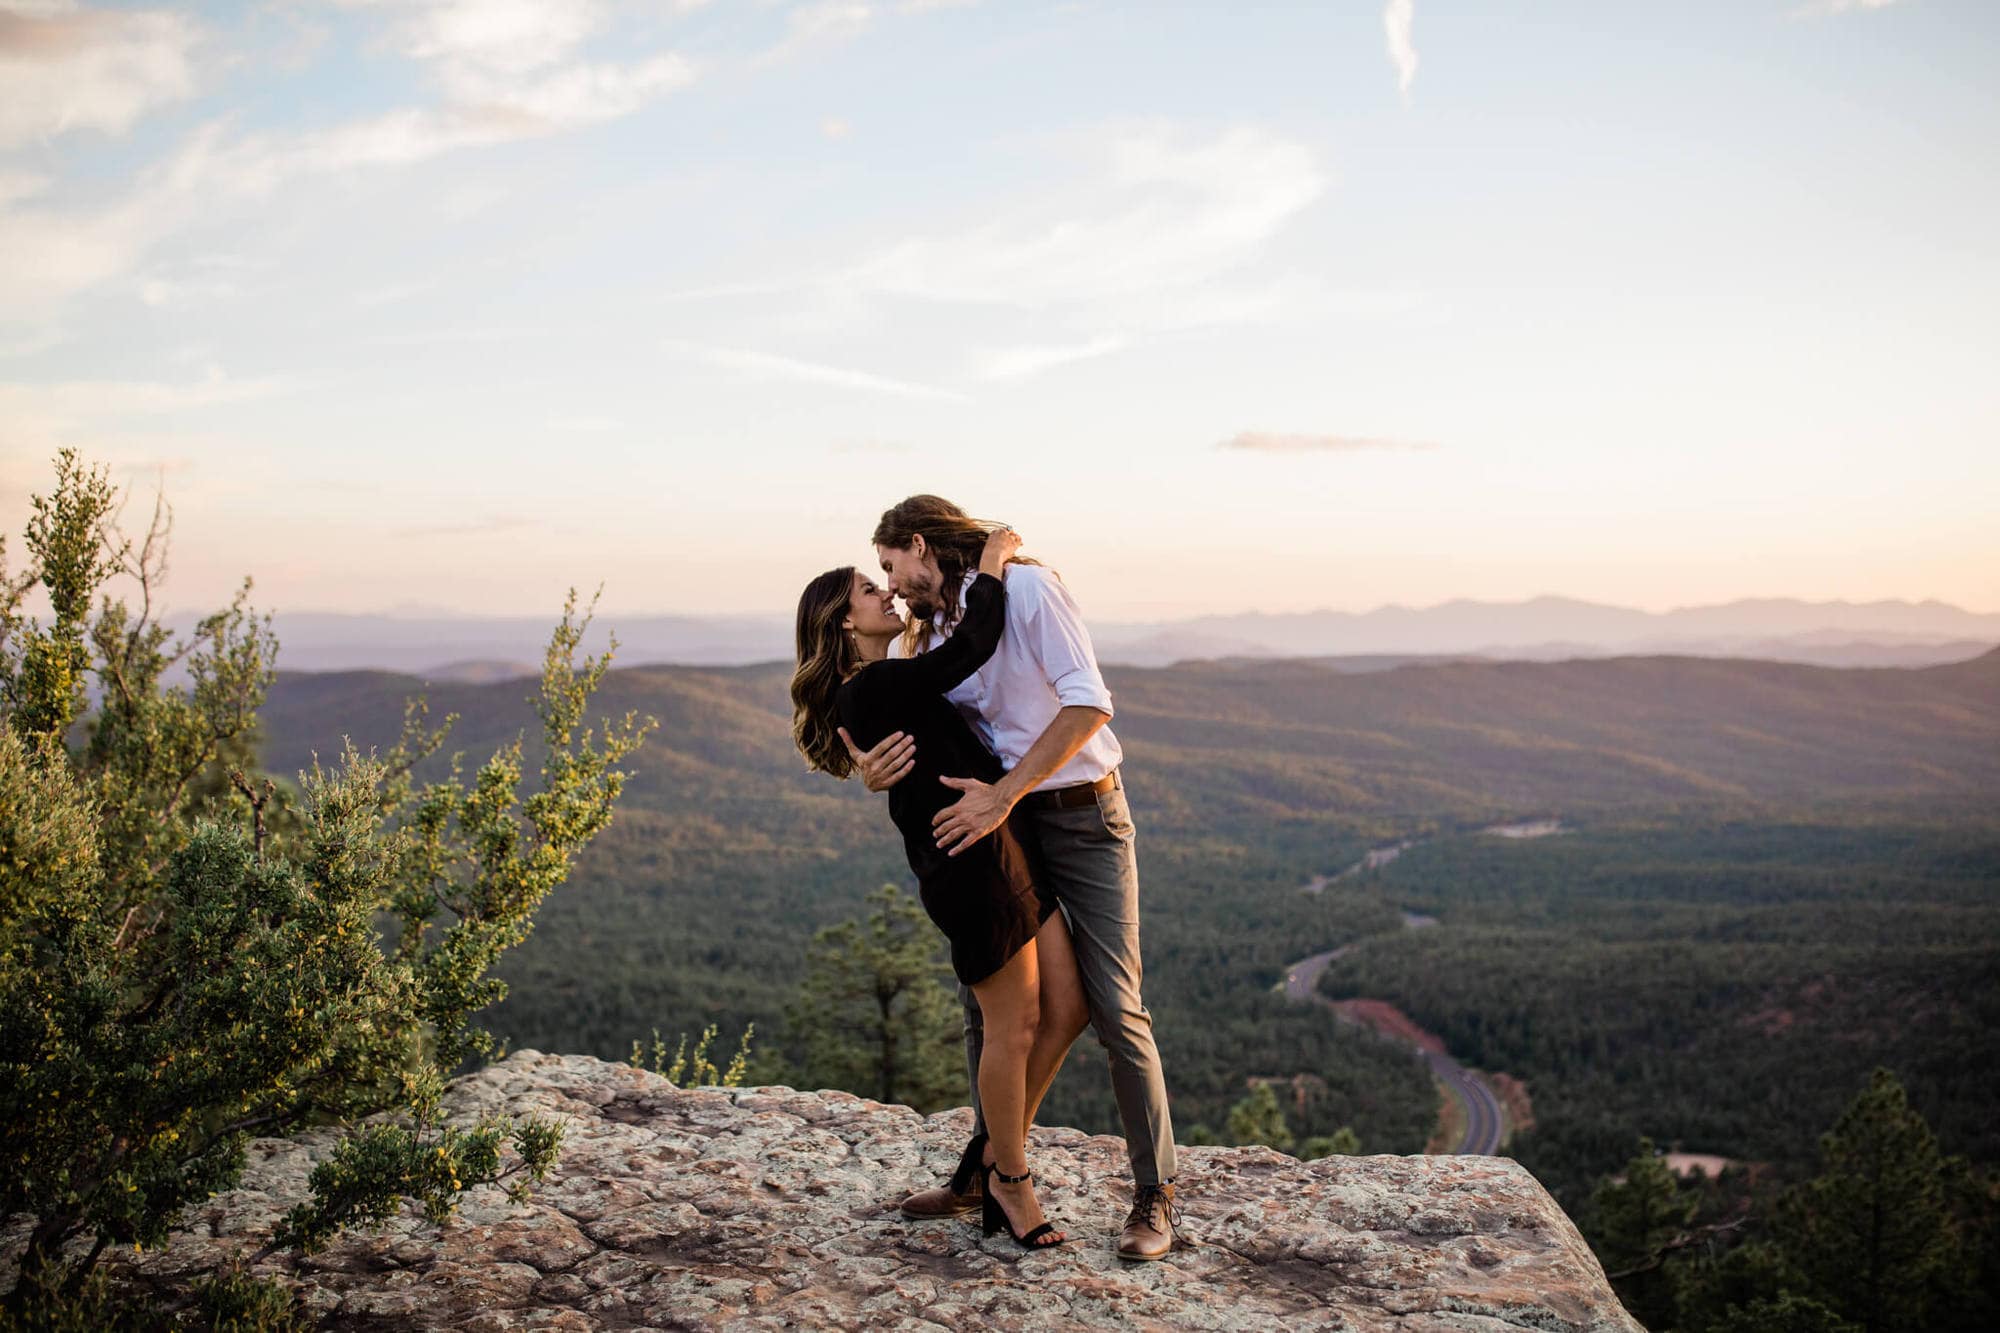 David dips Leah at the edge of the Mogollon rim during their forest engagement photos. it is the perfect spot for adventure and forest vibes.